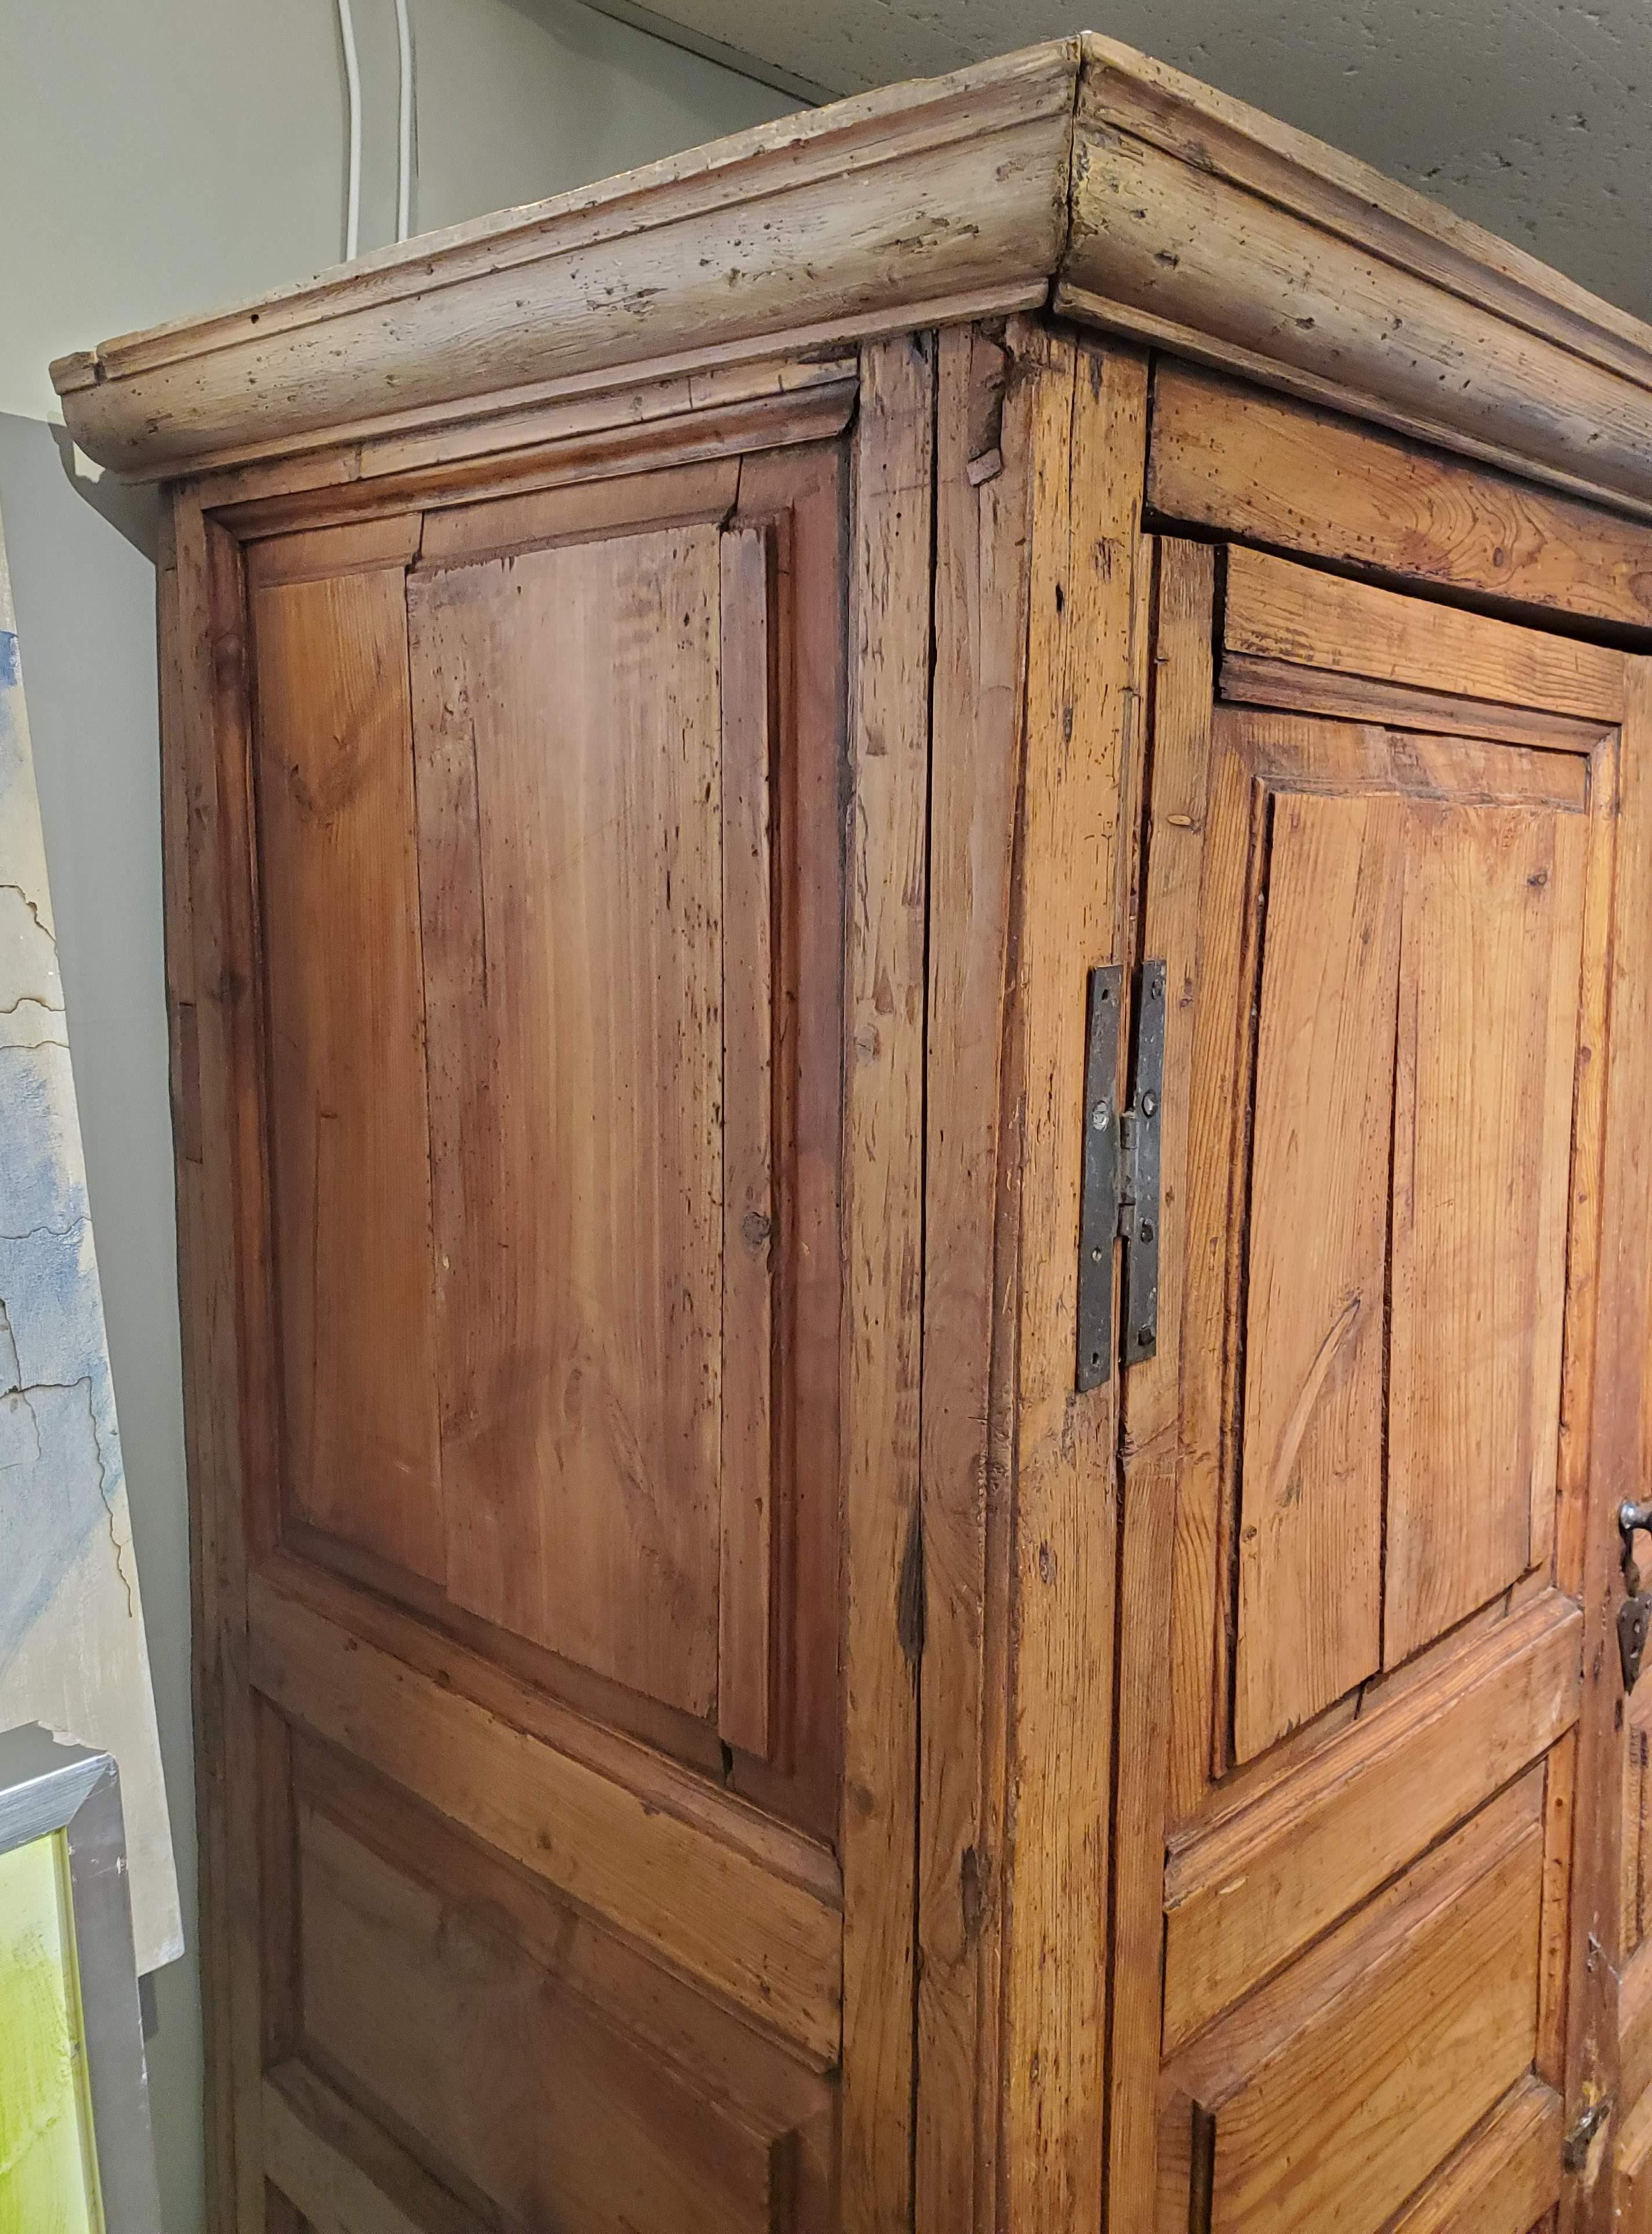 Small 18th century Southern Irish pine cabinet. Made of honey colored Pine with a rich patination. Two doors with fielded panels retaining the original “H“ hinges. Good small proportions. County Cork, Ireland, circa 1780.
Measures: 69” H 50” W 25”